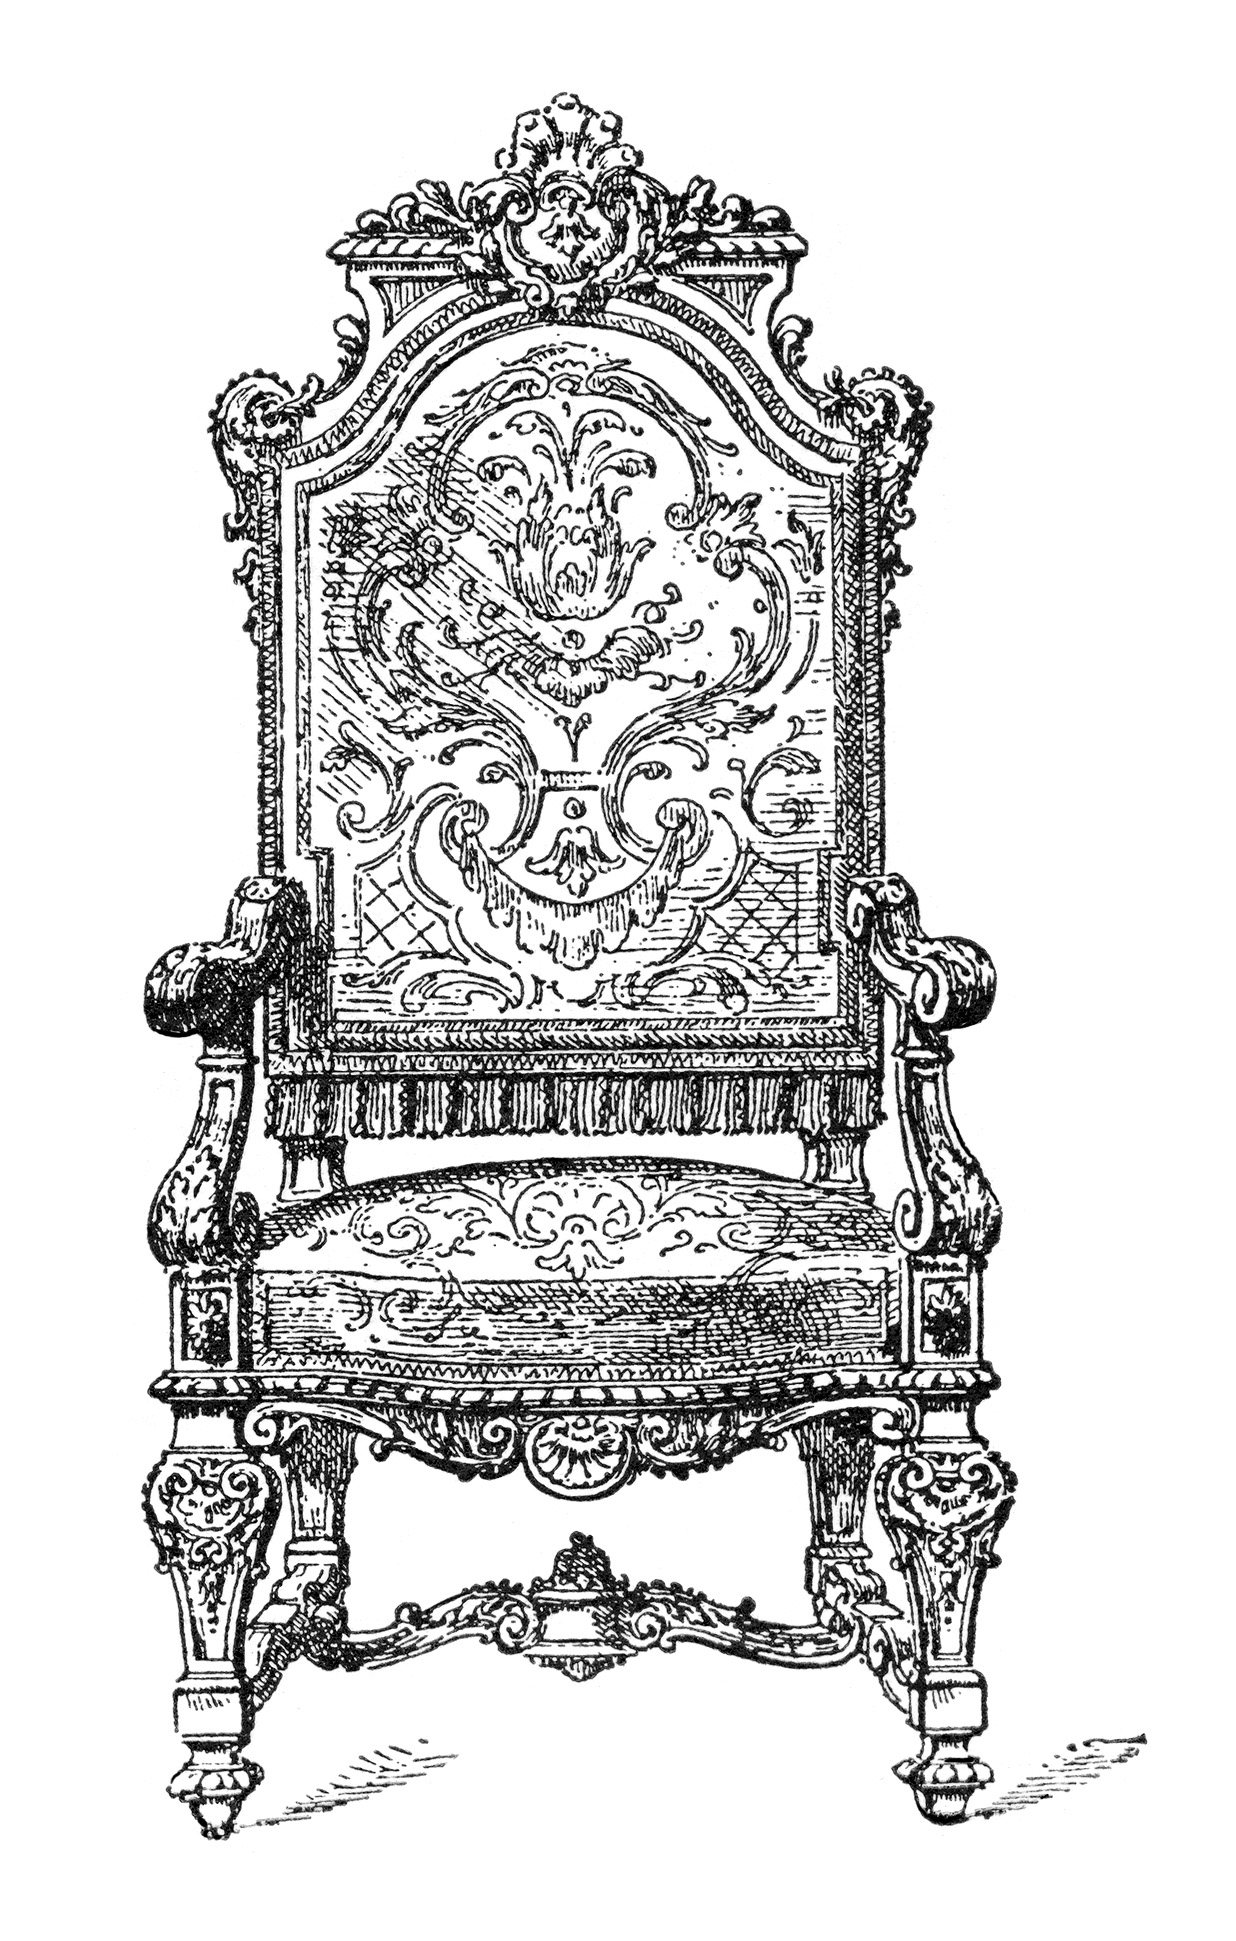 Here Is An Intricately Detailed Ornate Chair  It S From A New  Old